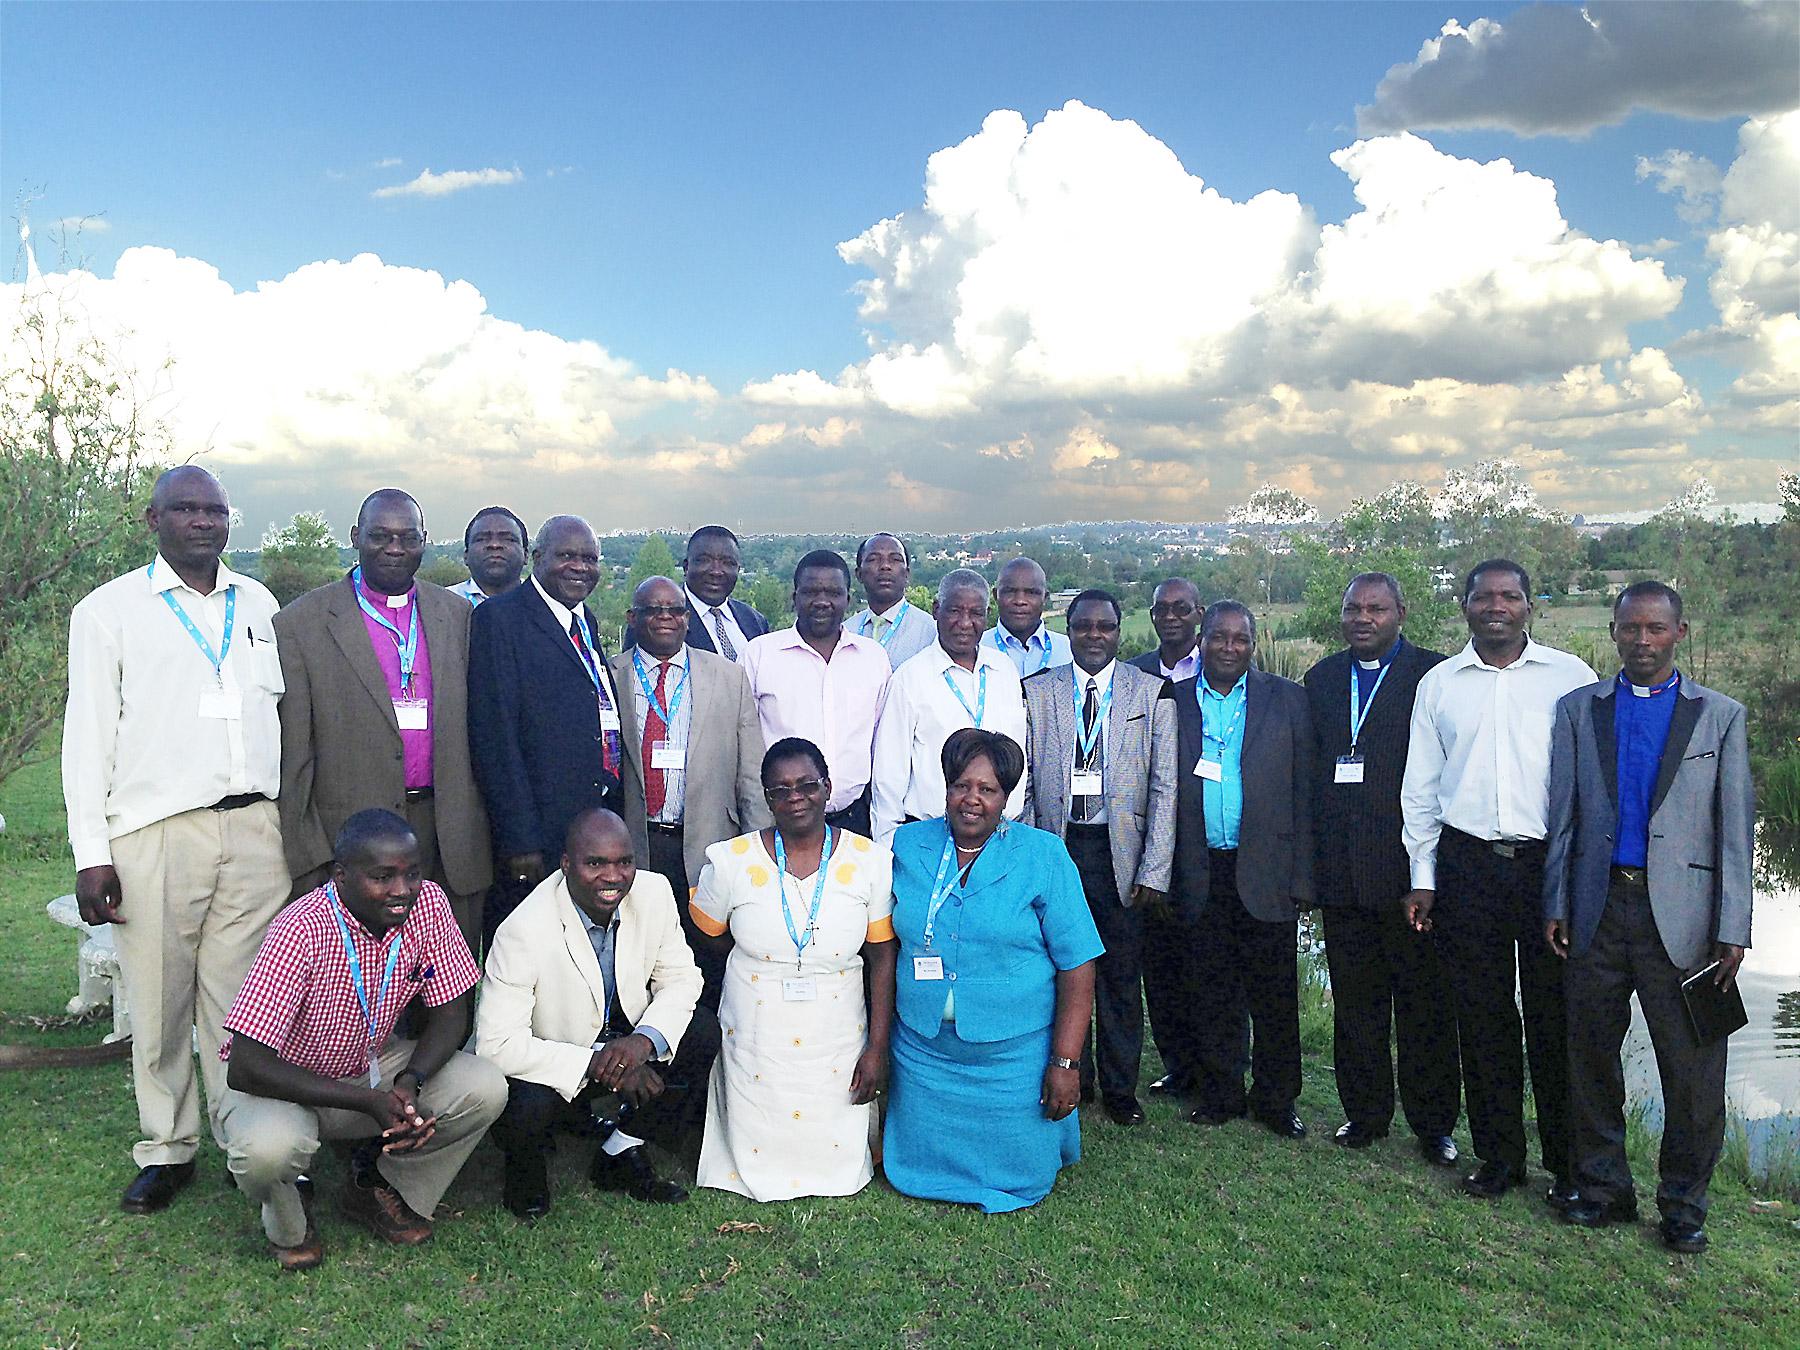 Participants in the workshop on religion and development. Photo: LWF/I. Benesch